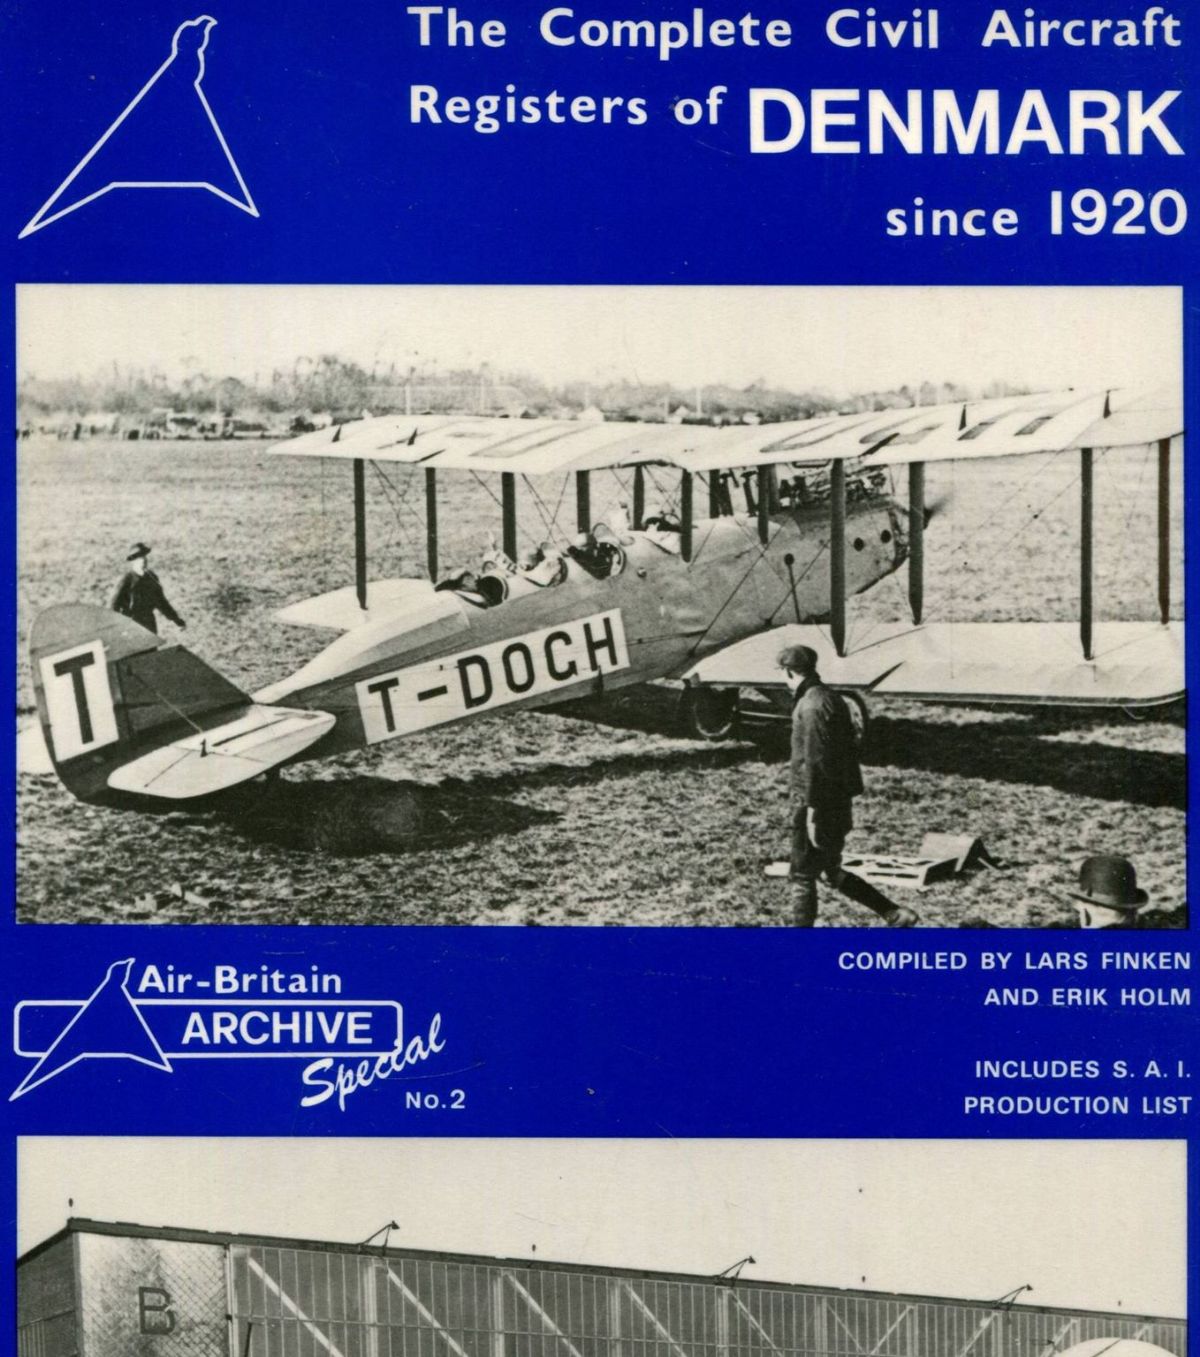 The Complete Civil Aircraft Registers of DENMARK since 1920